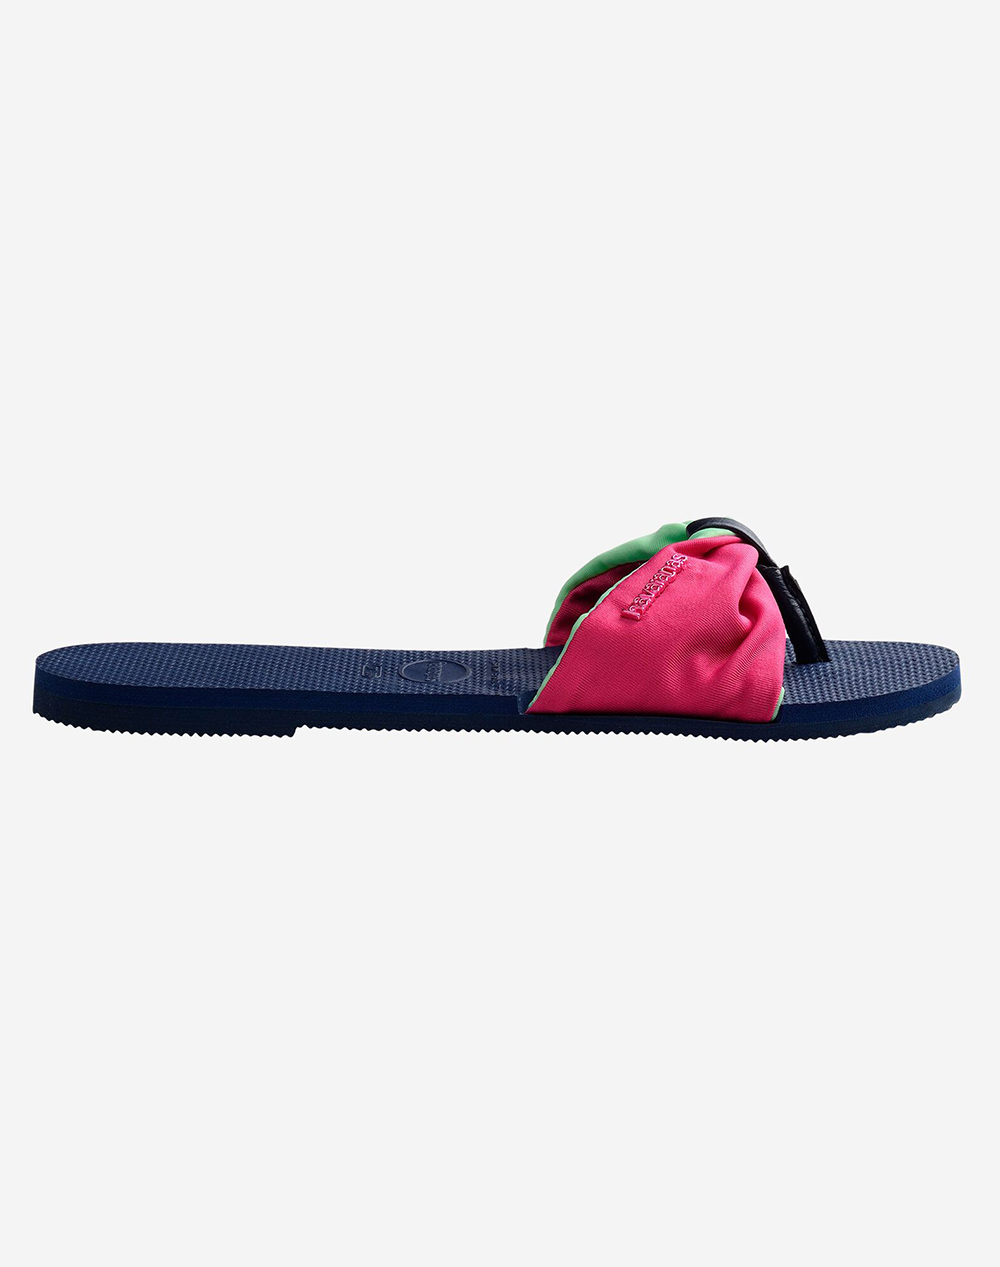 HAVAIANAS YOU ST TROPEZ COLOR ΣΑΓΙΟΝΑΡΕΣ 4146928-0555 Blue